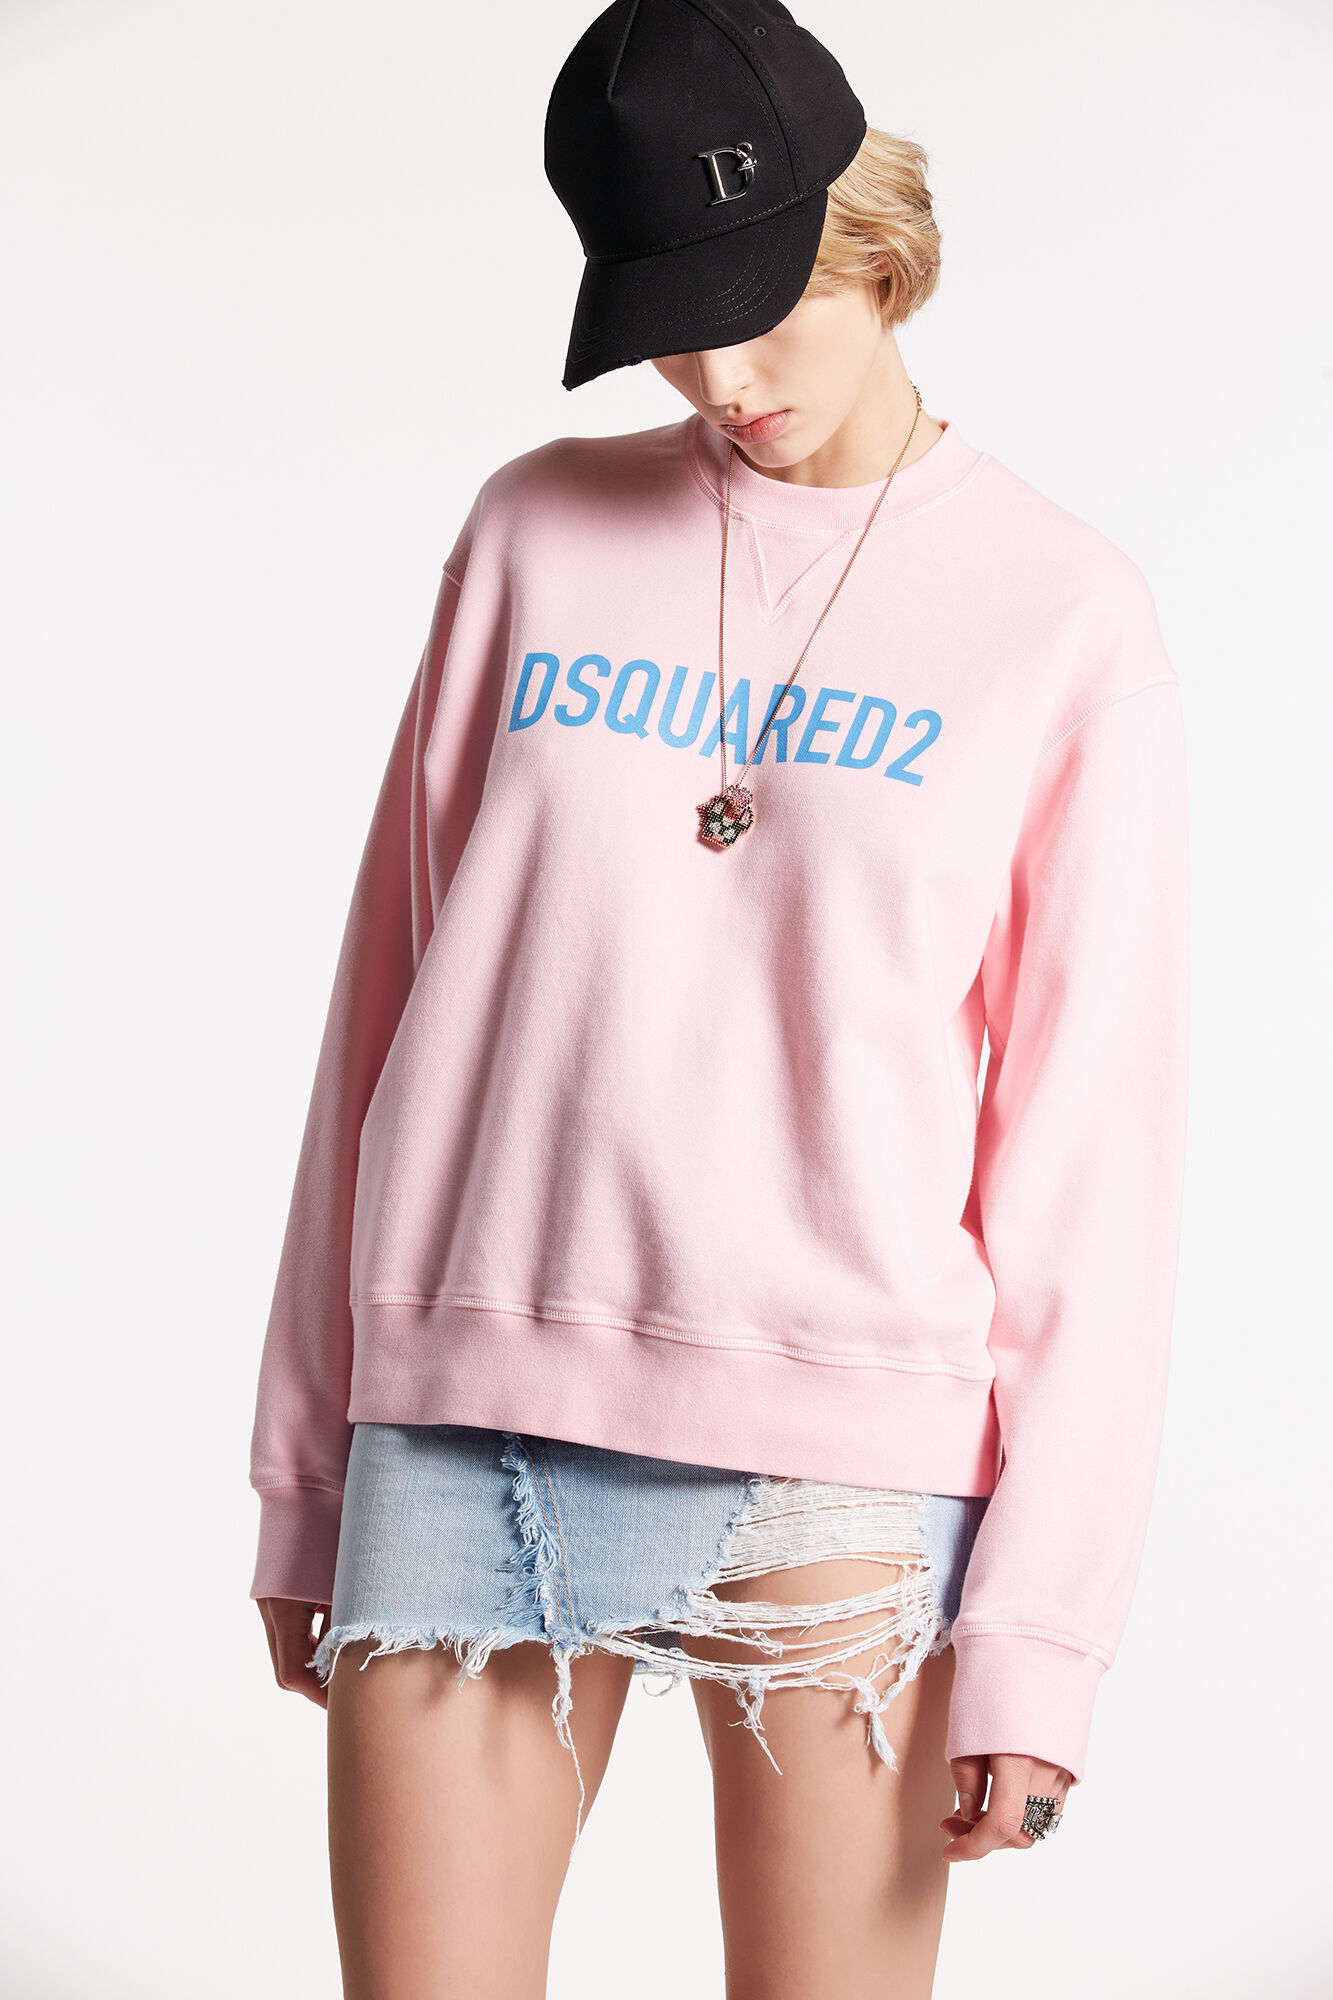 TIE&DYED DSQUARED2 SWEATSHIRT /COOL FIT /WASH /0231-